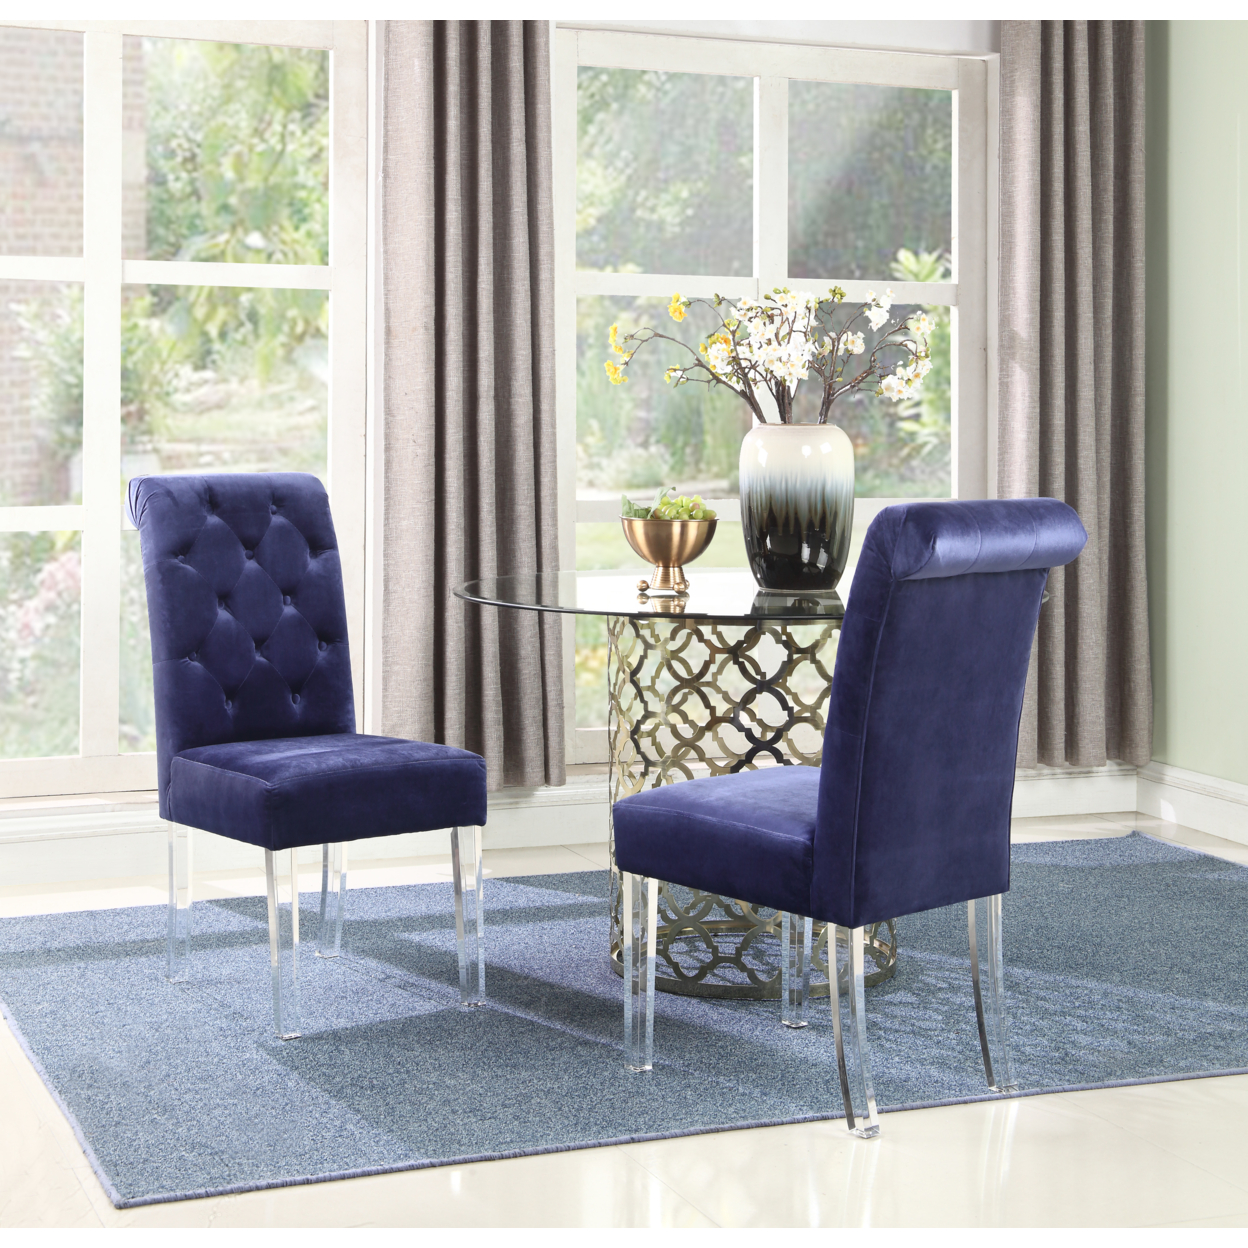 Helga Dining Side Chair Button Tufted Velvet Upholstered Acrylic Legs (Set Of 2) - Taupe